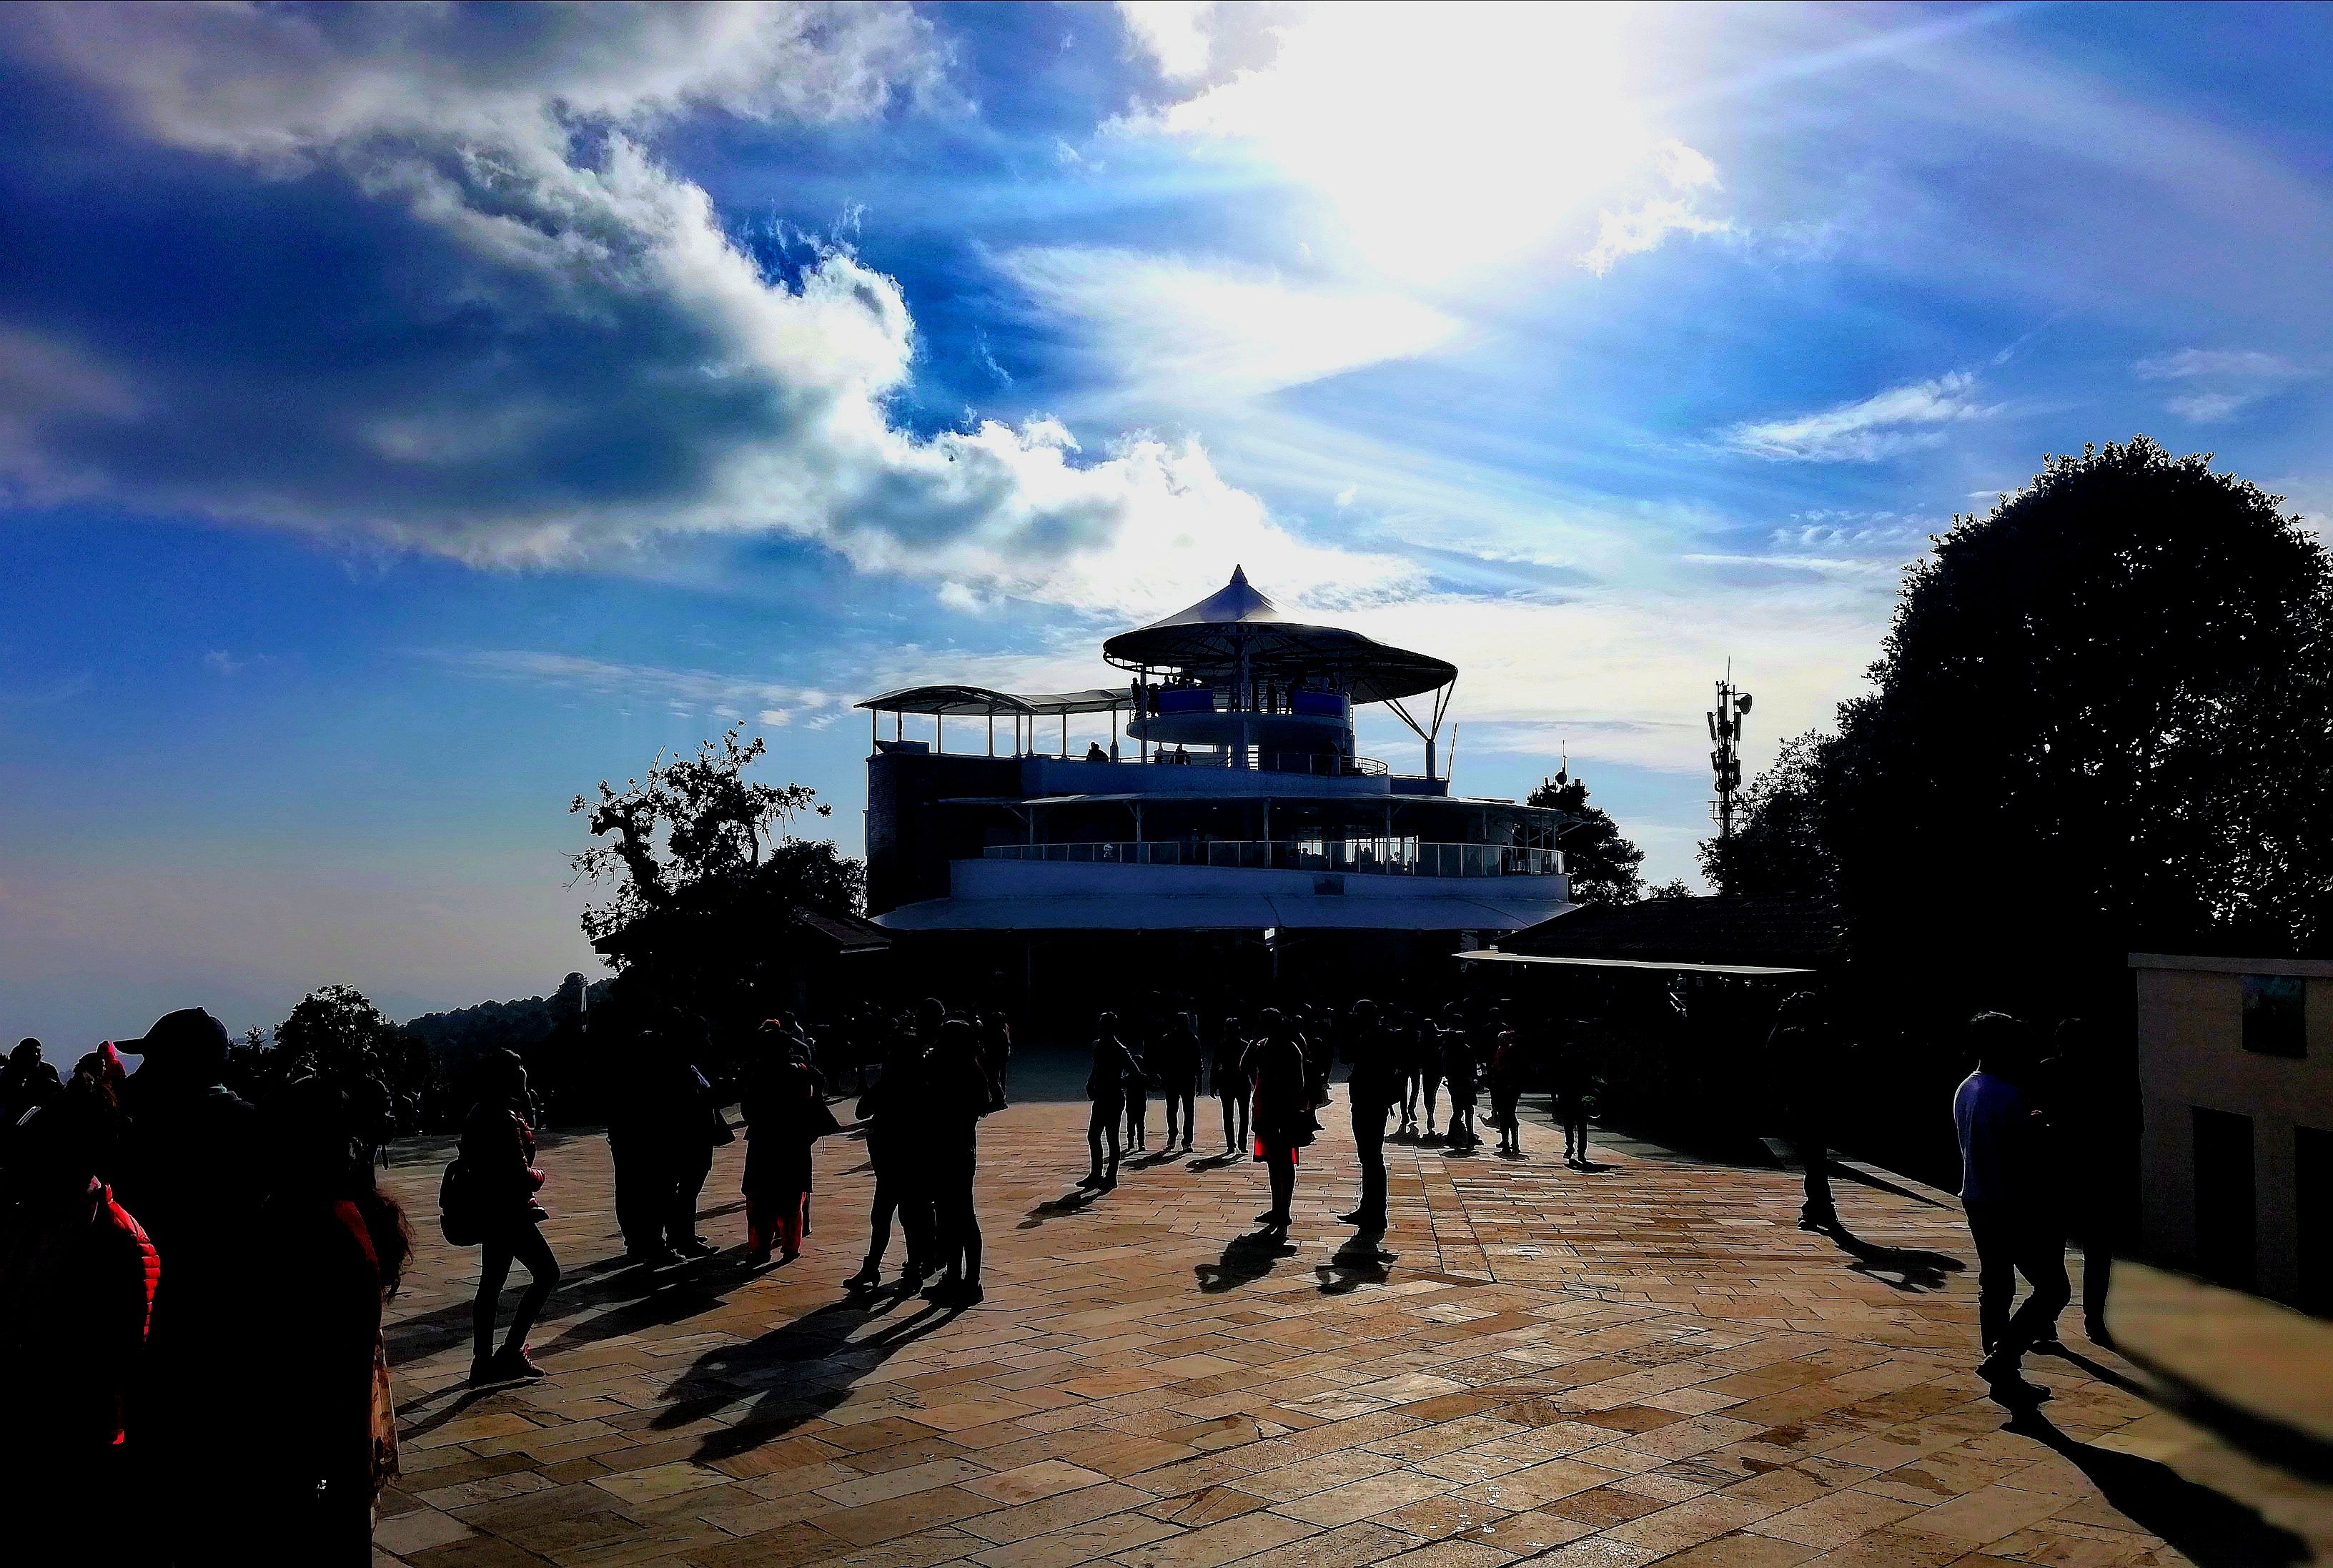 A photo shows visitors and the premises of Chandragiri Hills, Nepal.